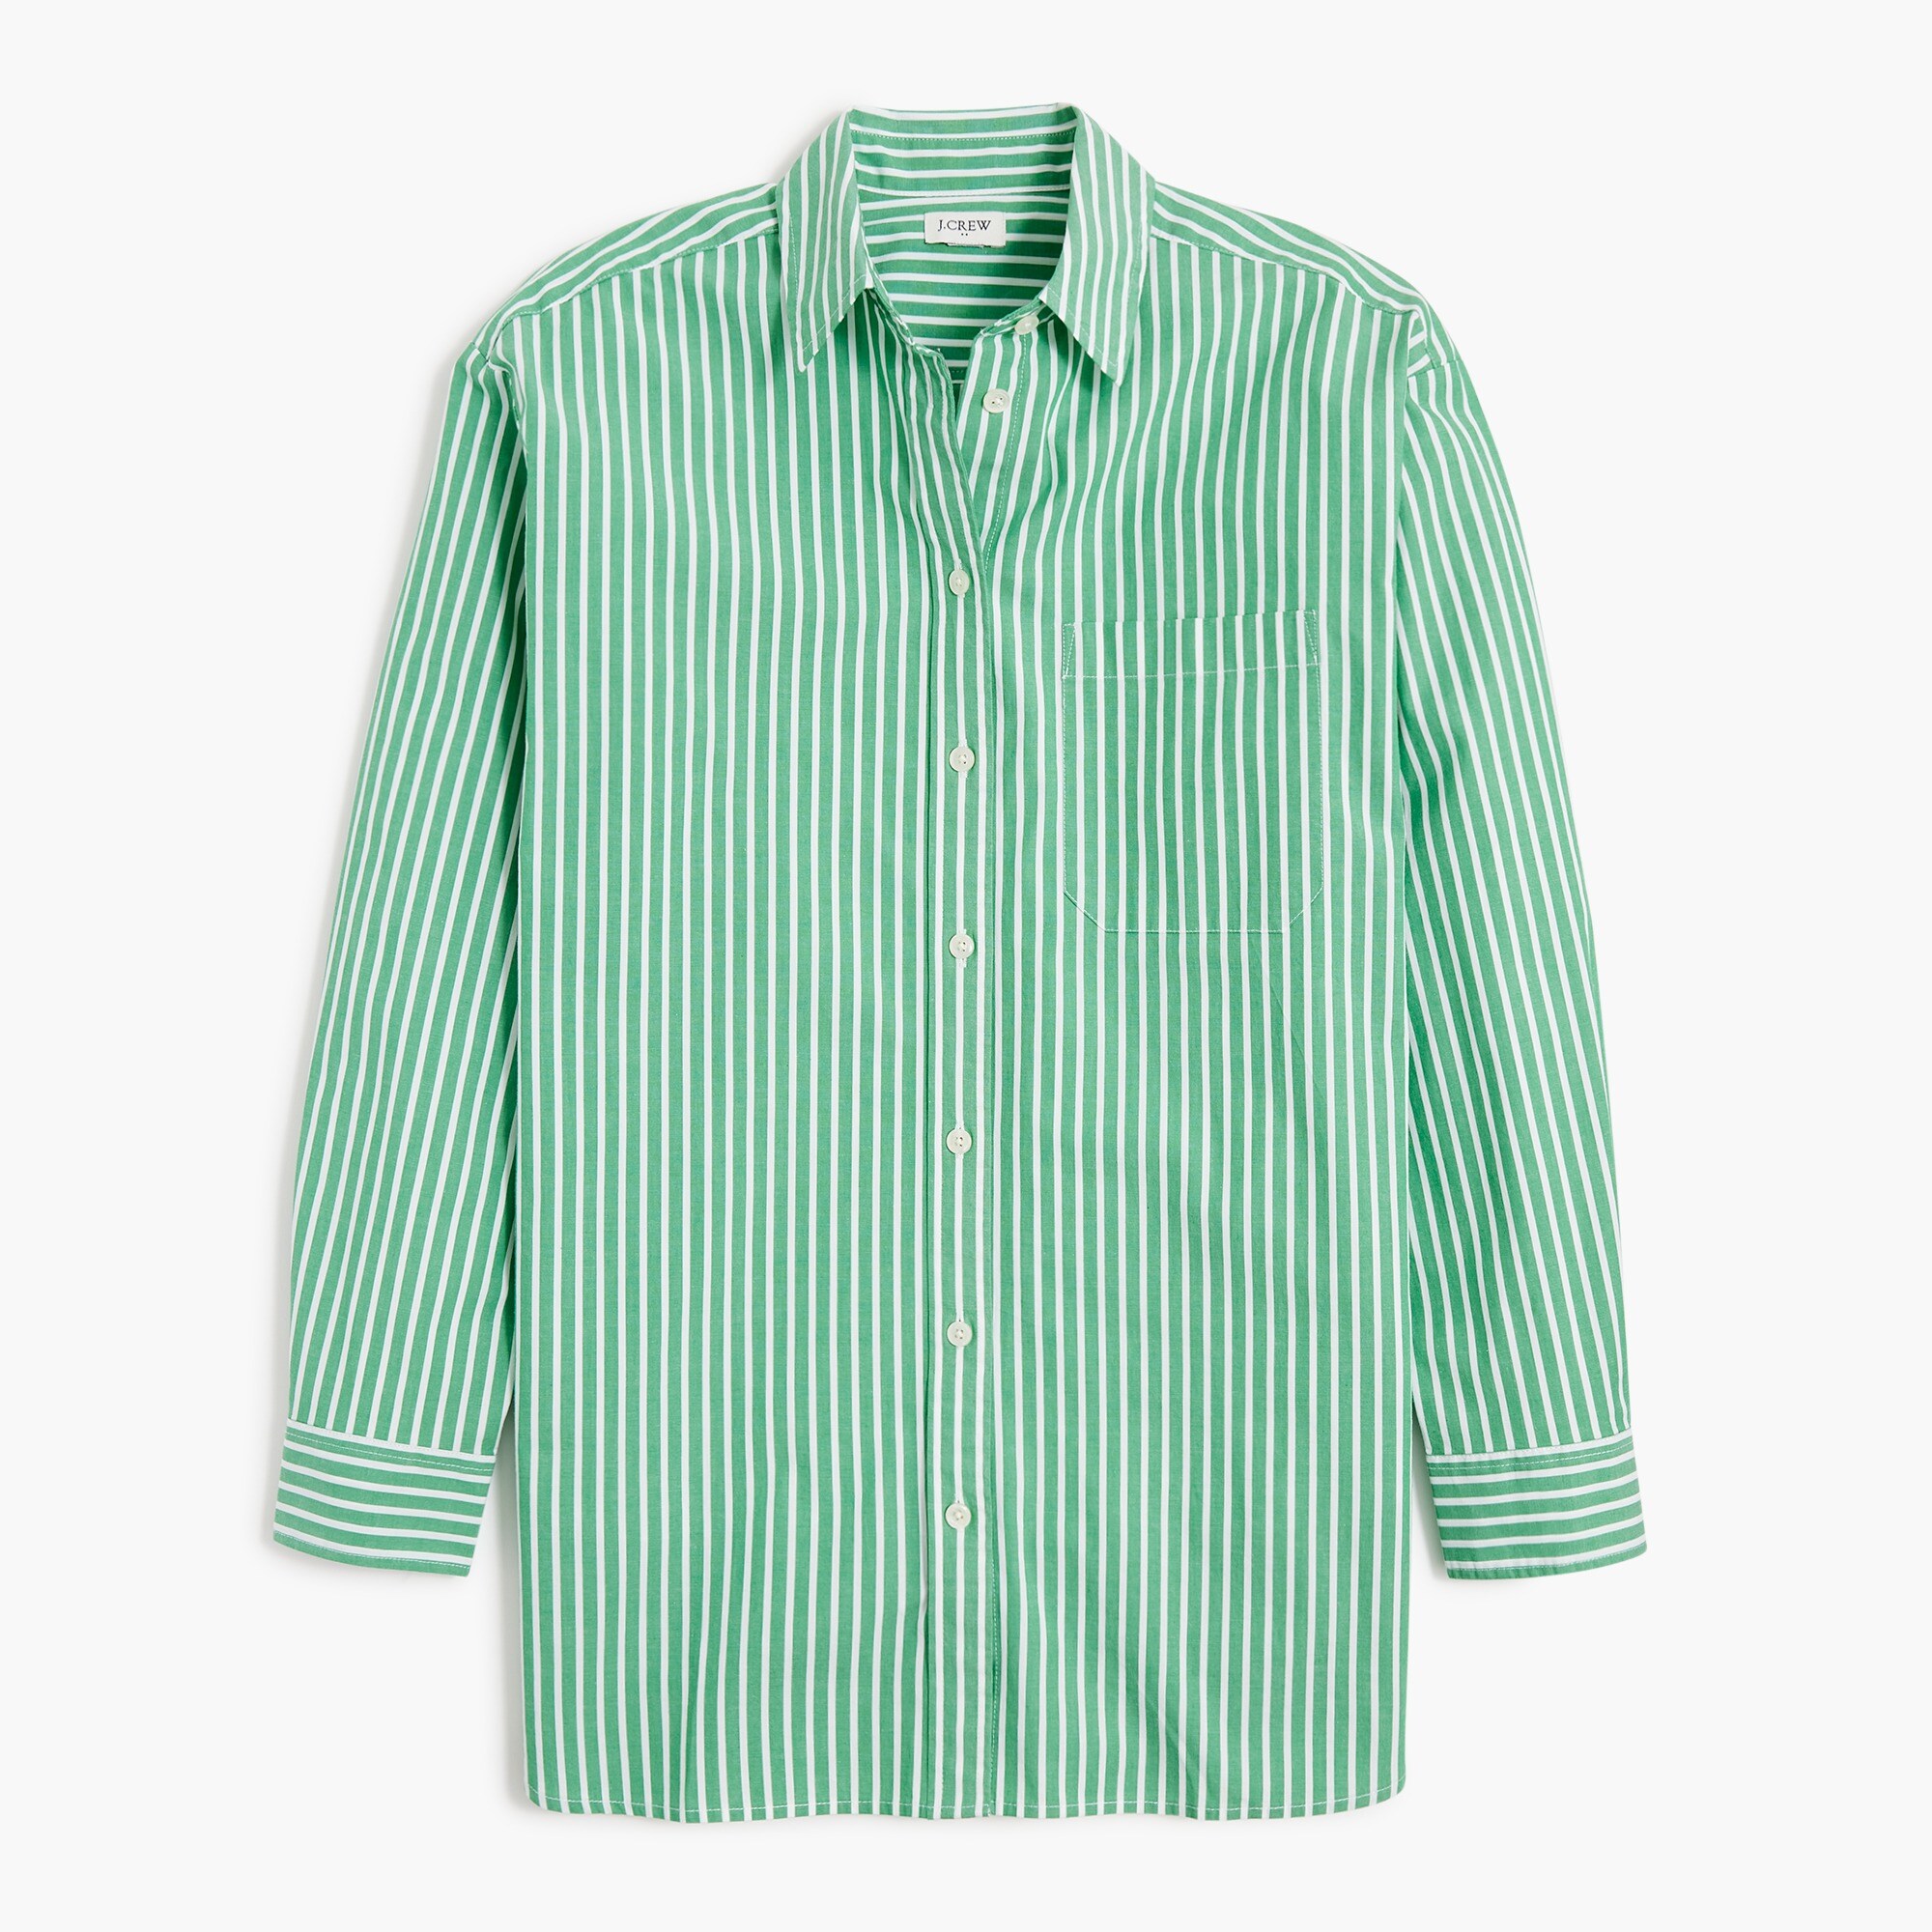  Petite relaxed button-up shirt